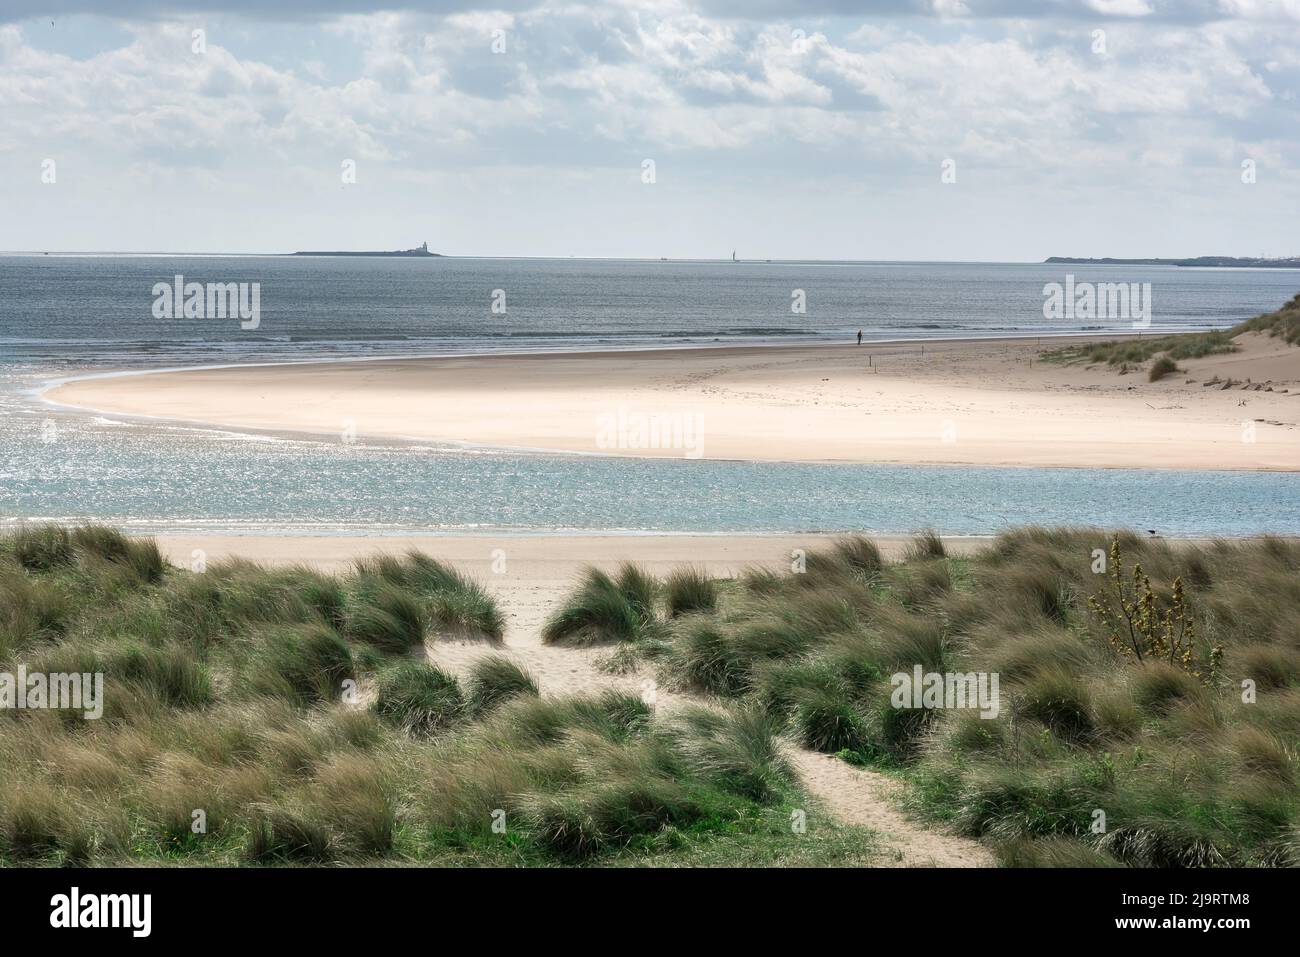 Beach Northumberland UK, view in late spring of the dunes and the white sandy beach in Alnmouth Bay on the Northumberland coast, Alnmouth, England, UK Stock Photo